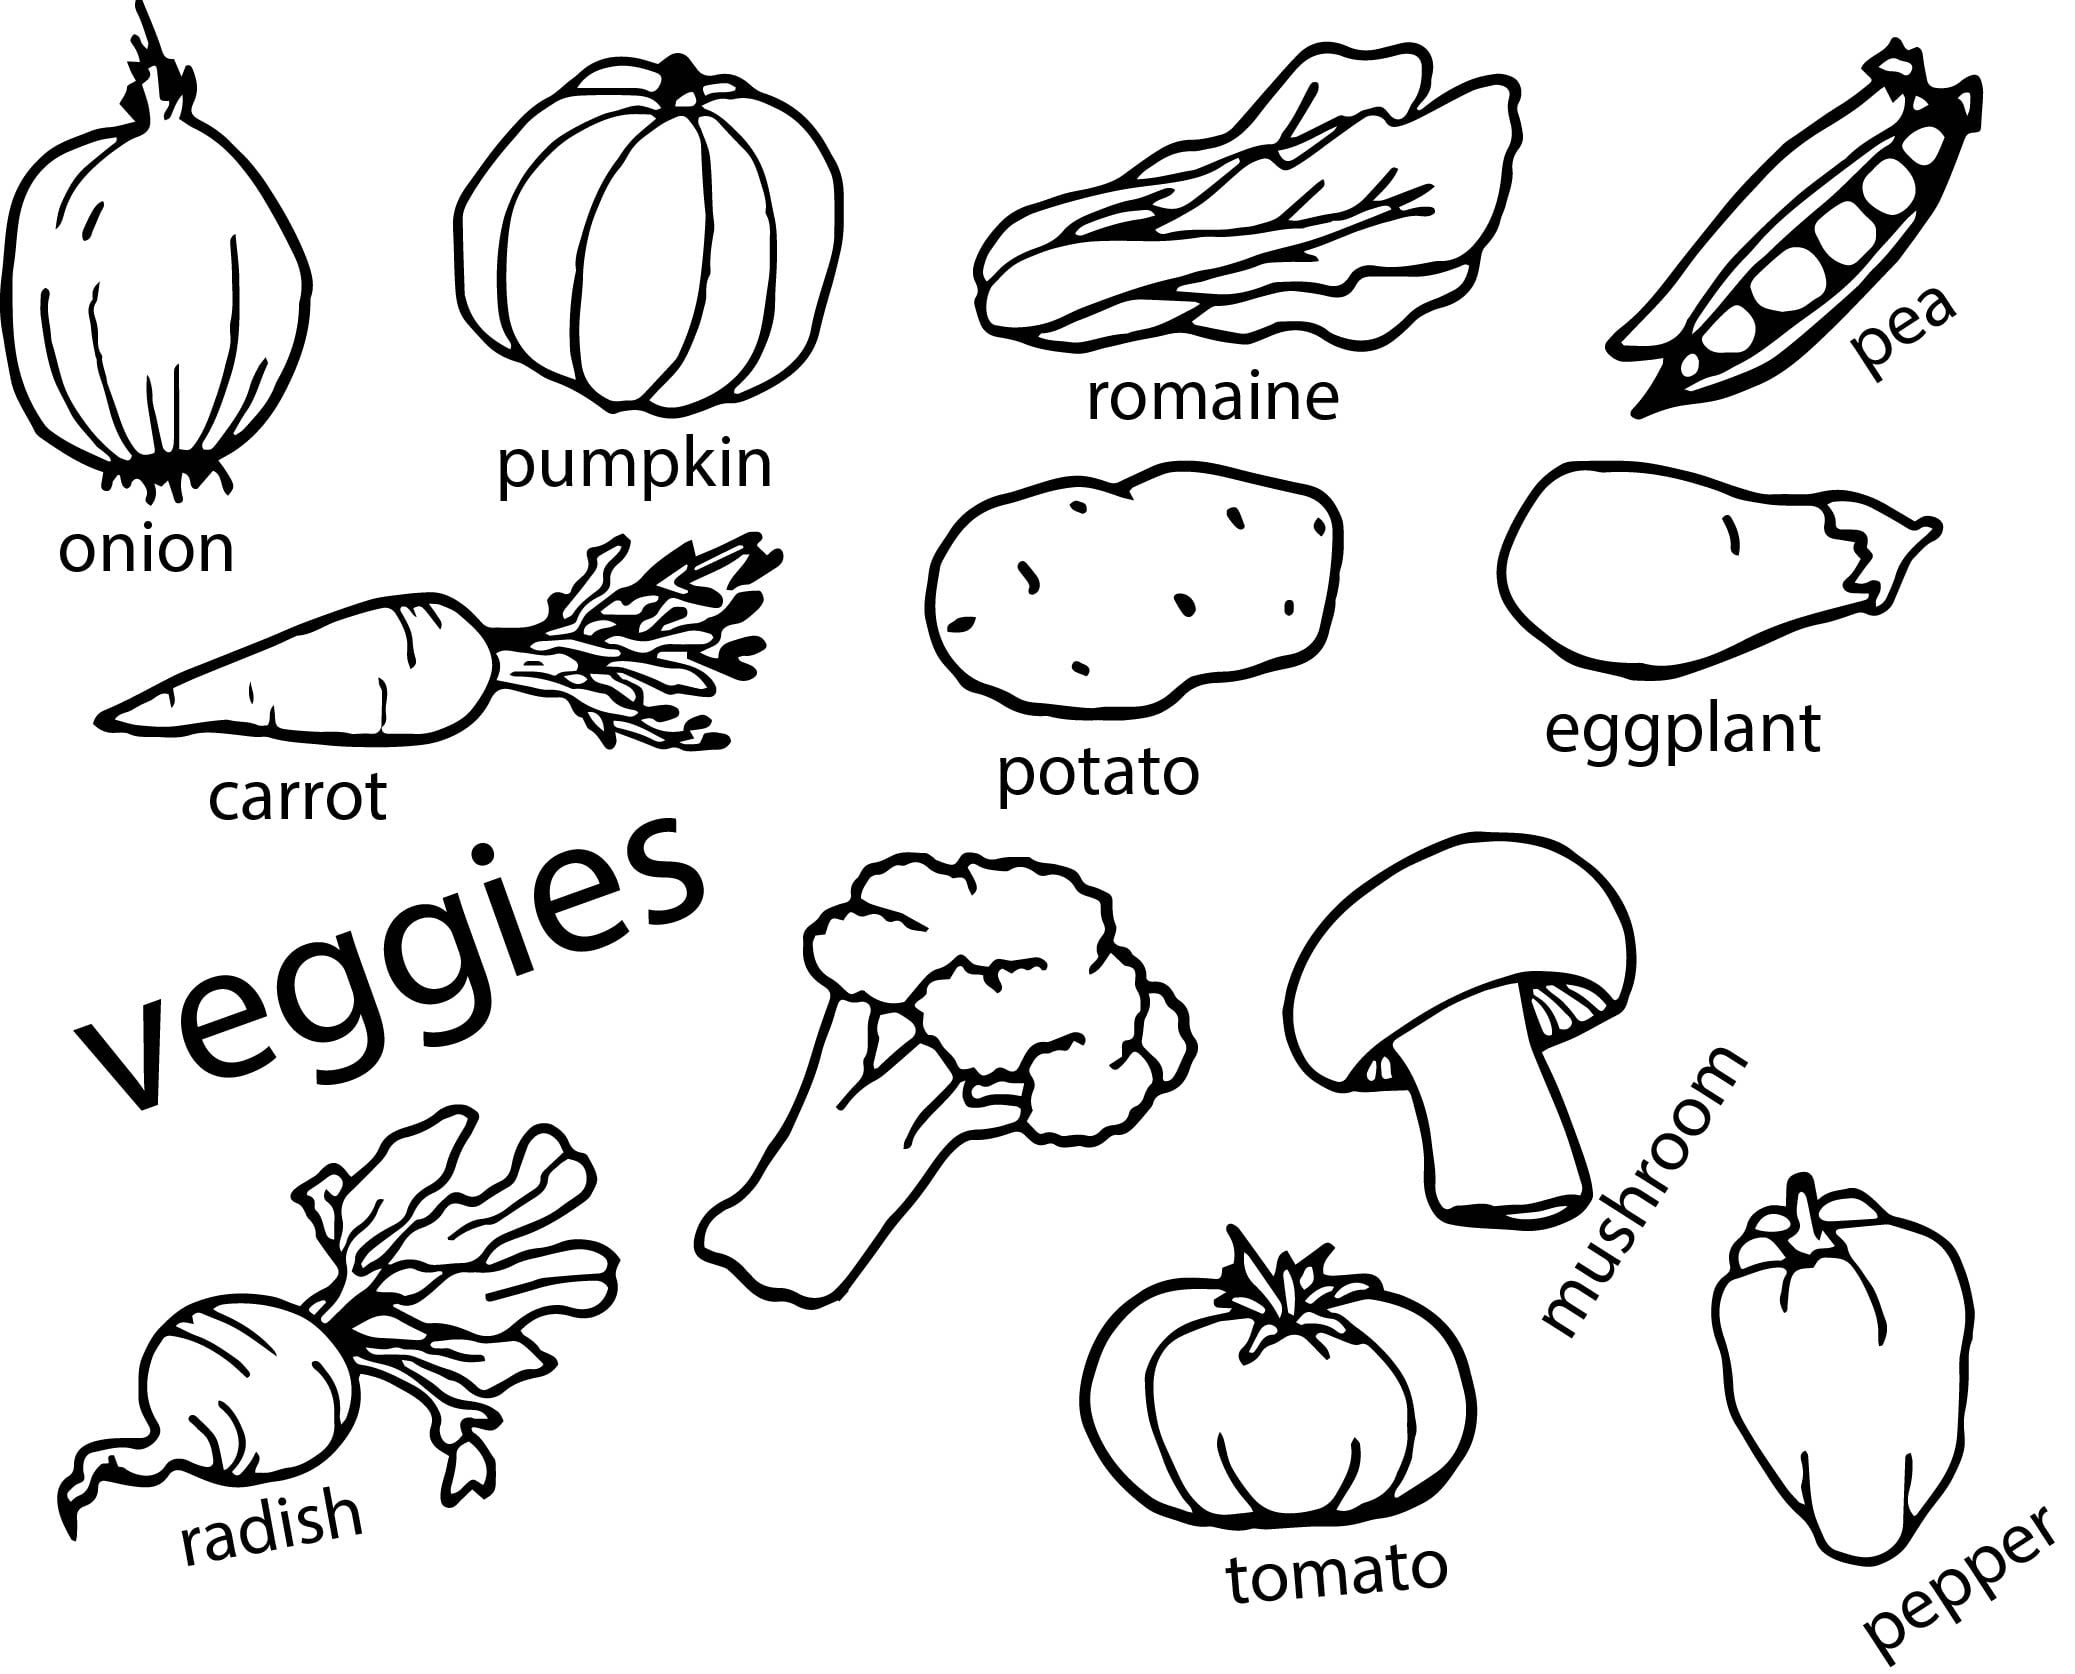 Vegetables Coloring Page Wecoloringpage.com - Coloring Pages